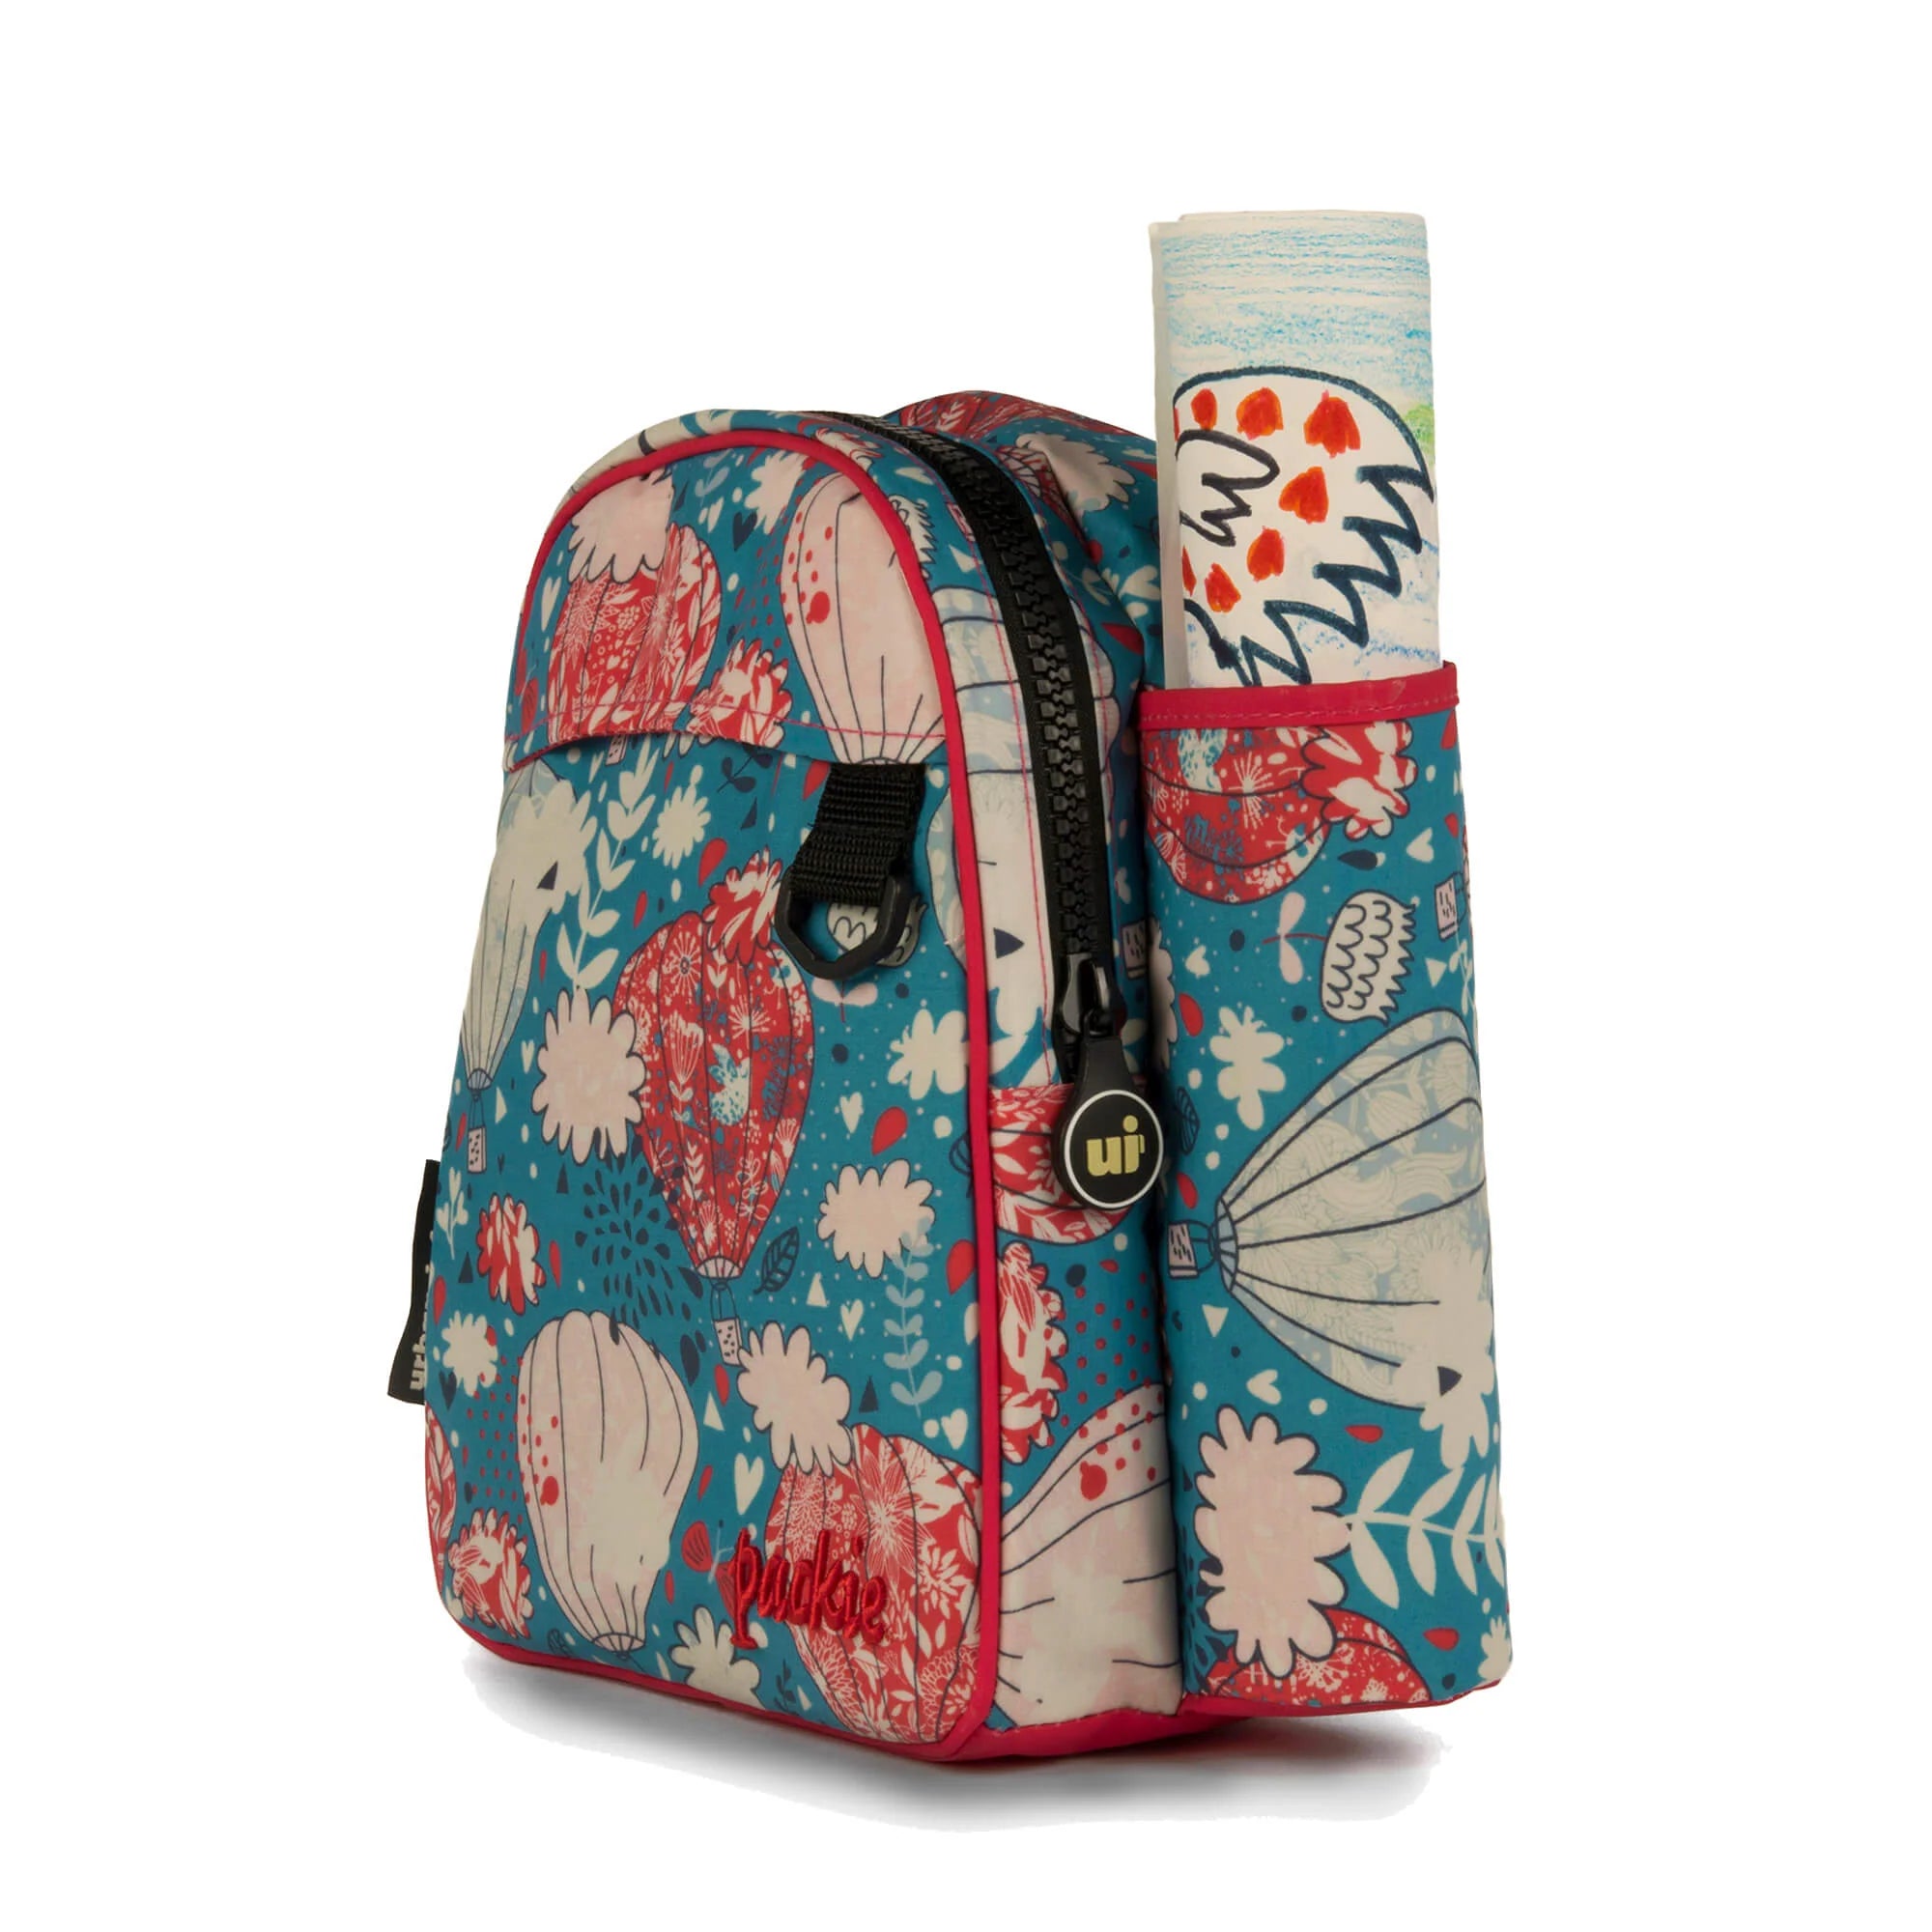 Packie Daycare  Preschool Backpack - Packed with Personality